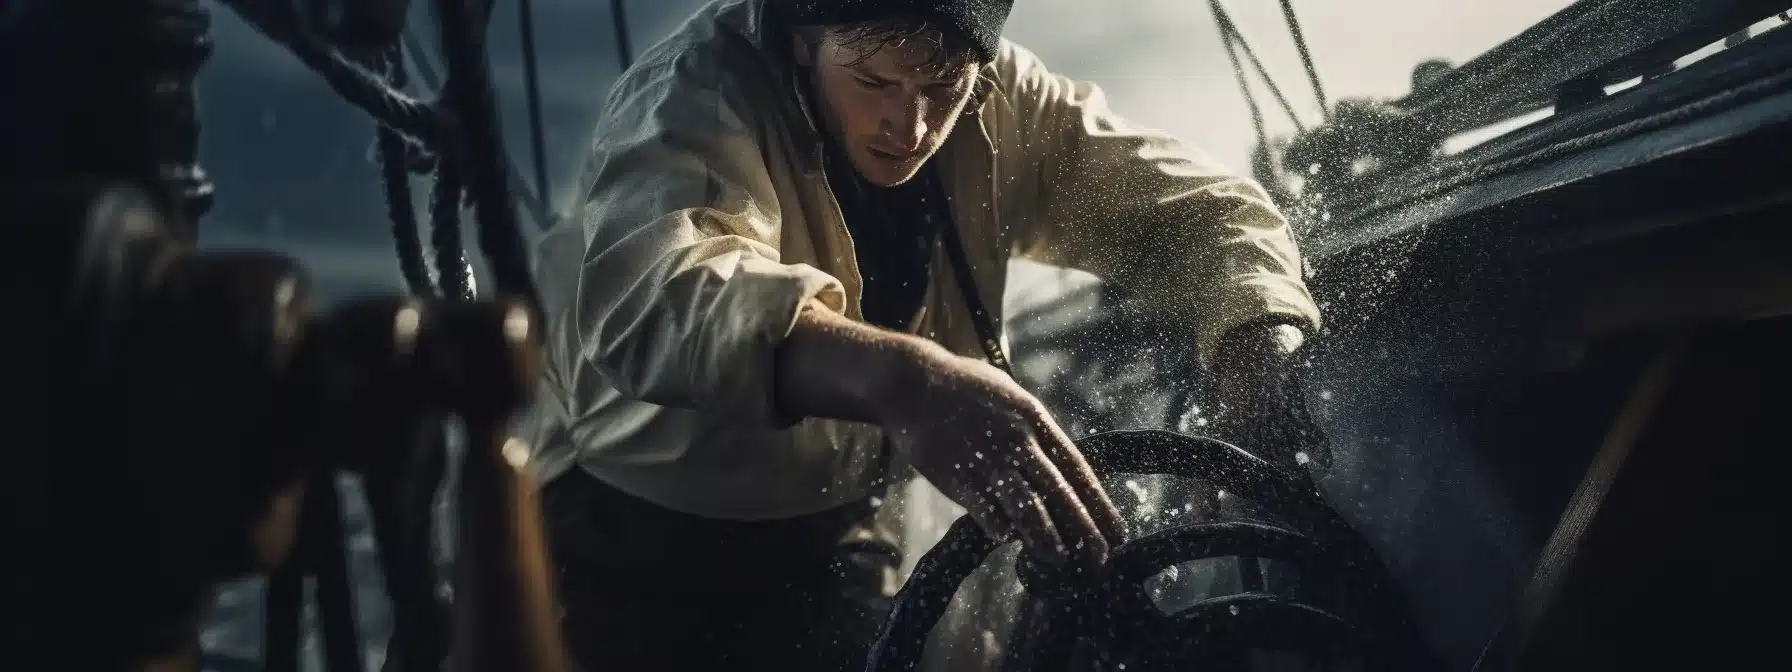 A Sailor Adjusting The Ship'S Wheel In Stormy Waters.